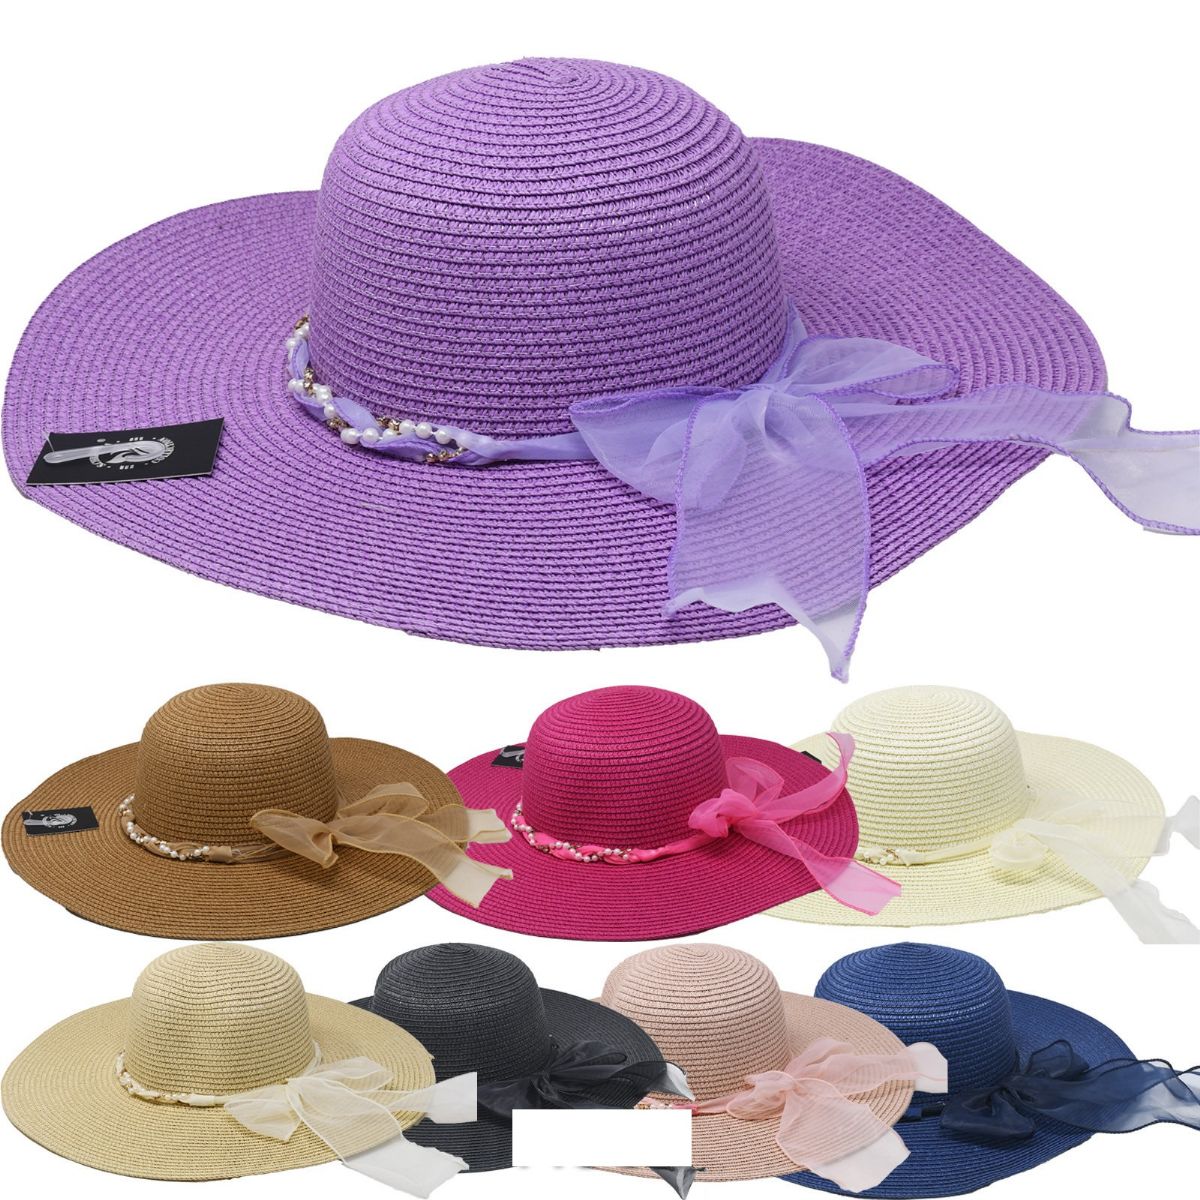 12 Pieces of Beach Hat With Pearl Ribbon Band Wide